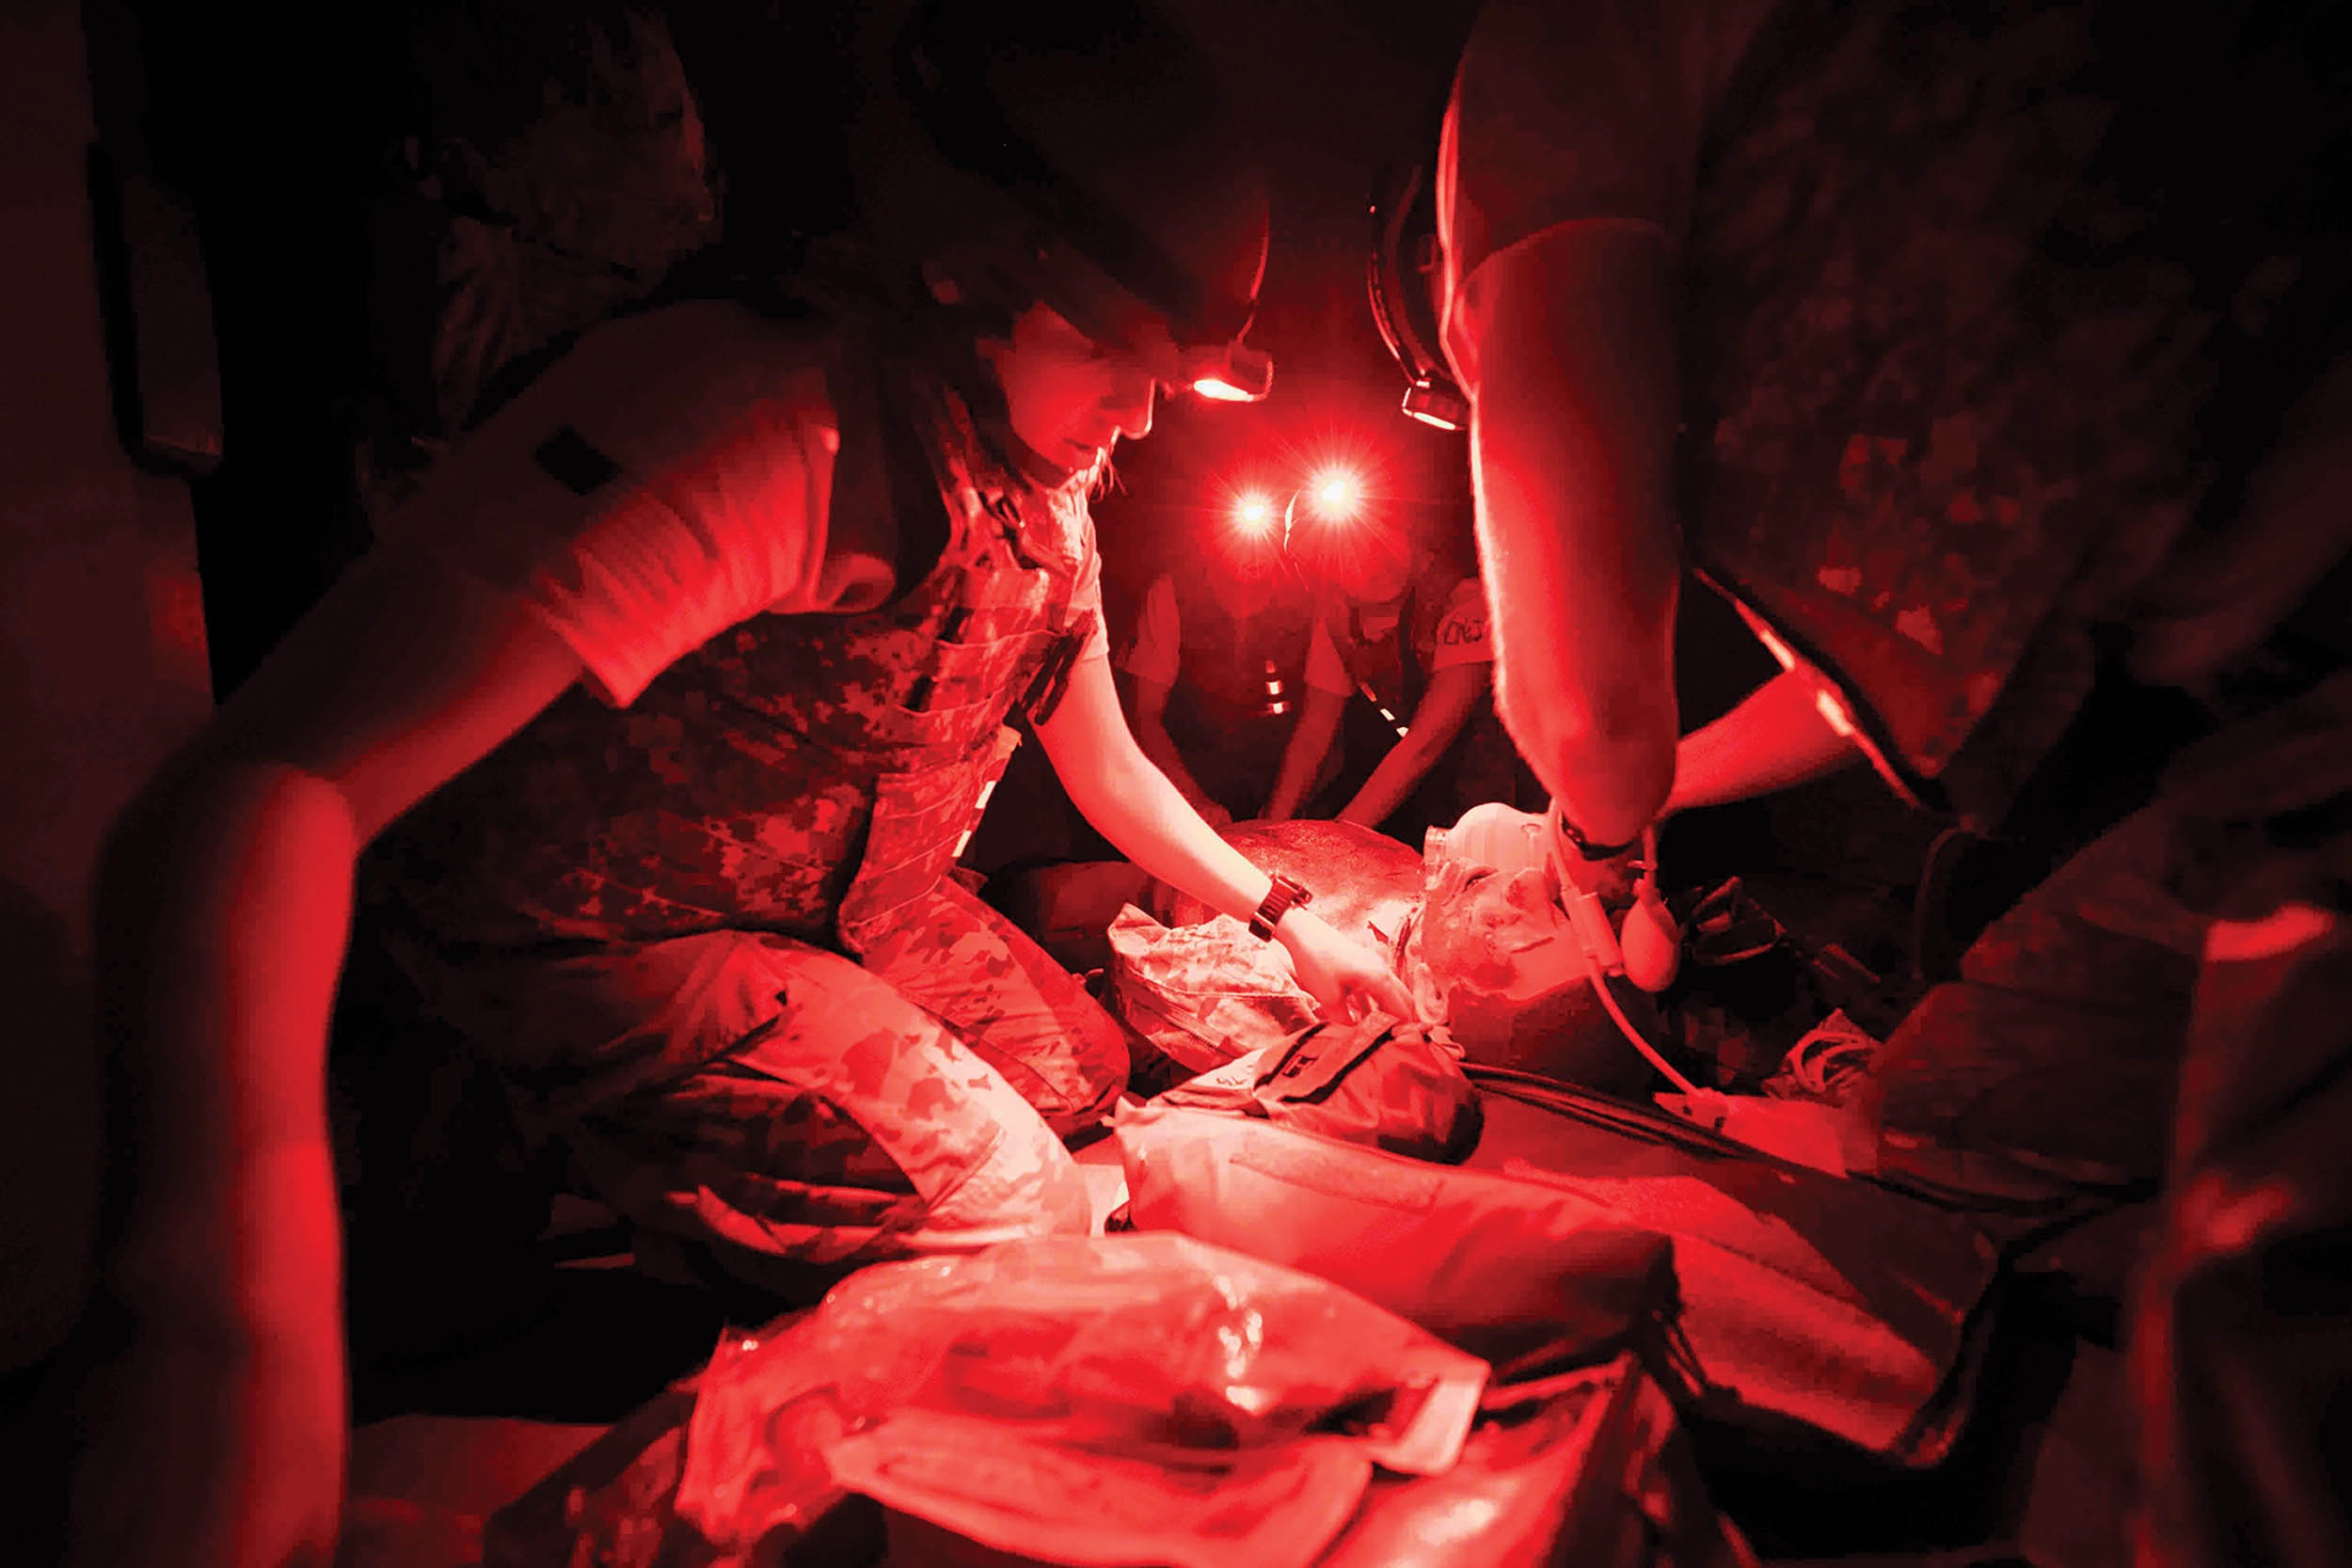 Air Force medics treat simulated patient during Medic Rodeo at Melrose Air Force Range’s Training Area 3B, New Mexico, August 23, 2023 (U.S. Air Force/Elora J. McCutcheon)